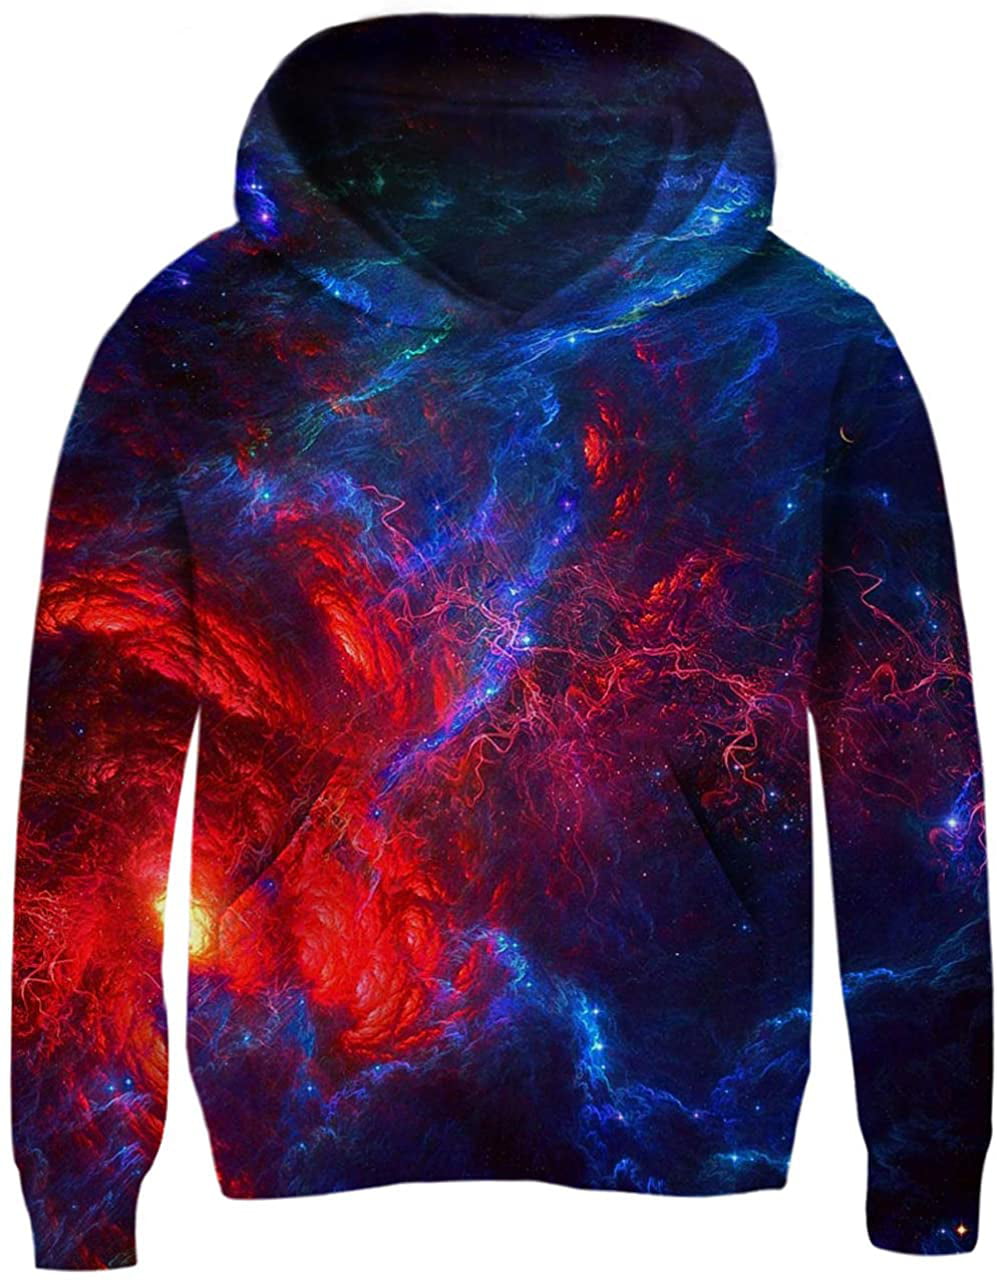 Unisex Hoodies for Kids 3D Prints Sweatshirts Pullover with Pocket for 7-15 Years